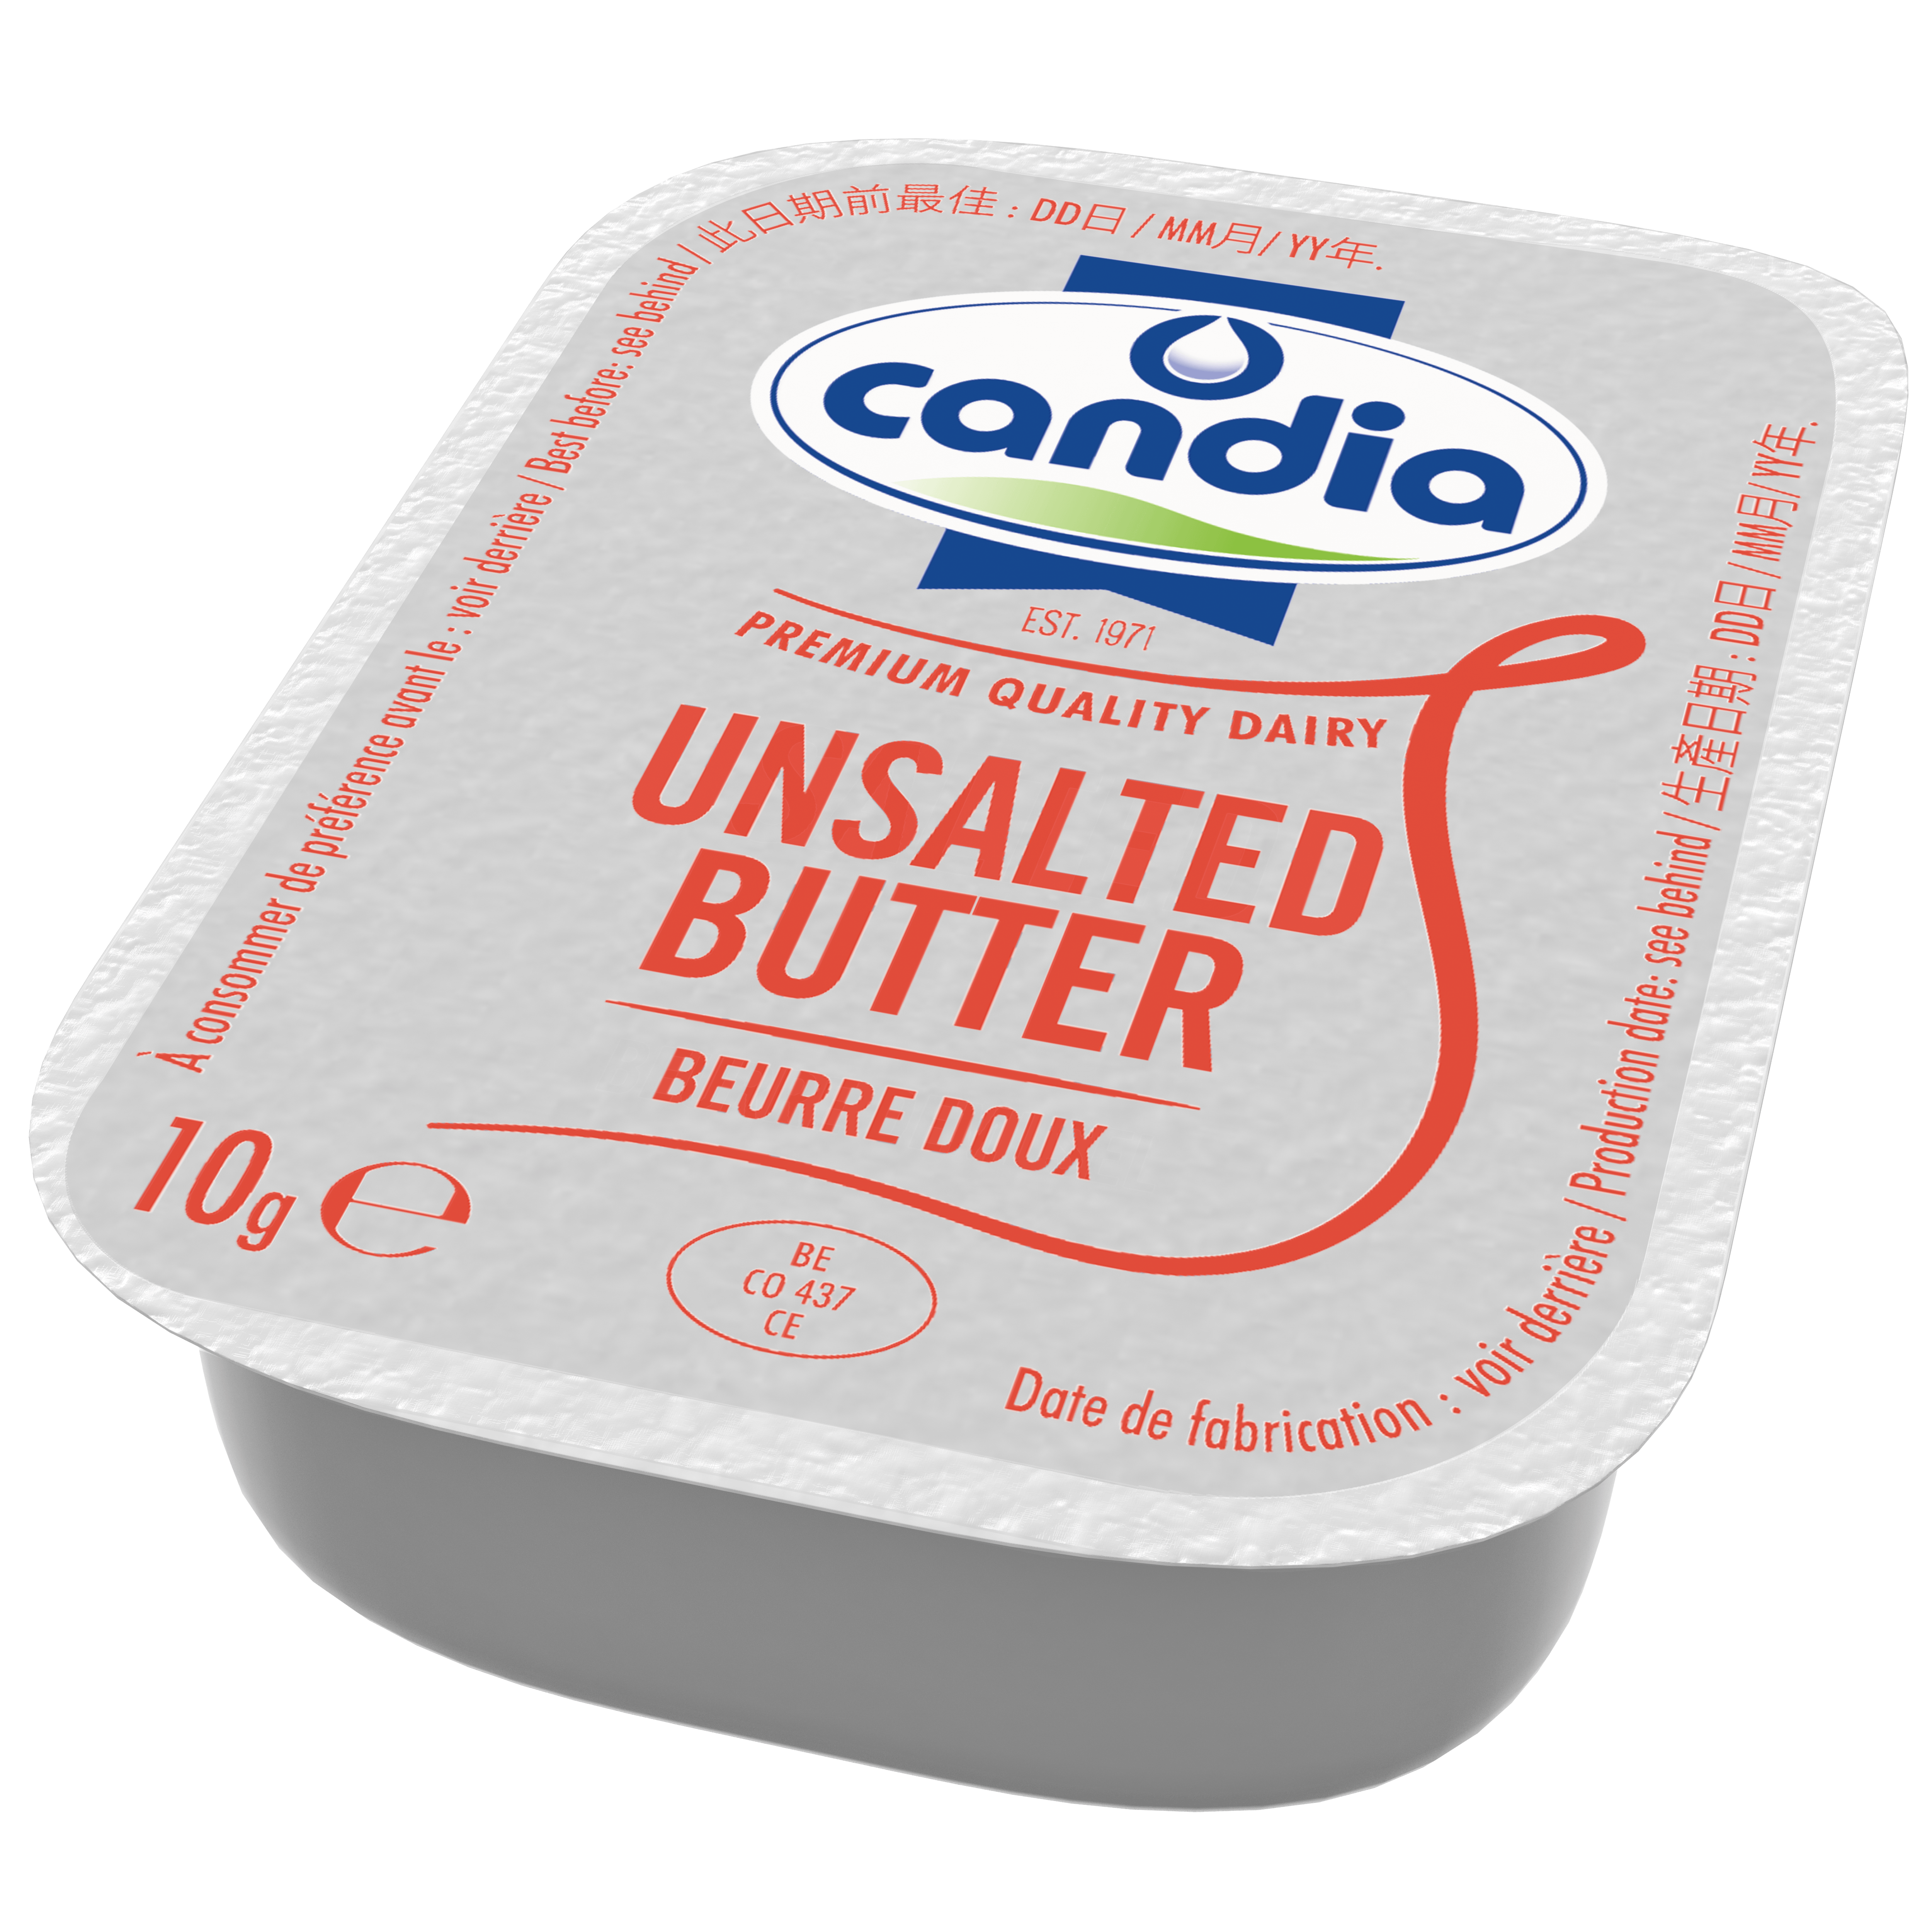 TRADITIONAL UNSALTED BUTTER